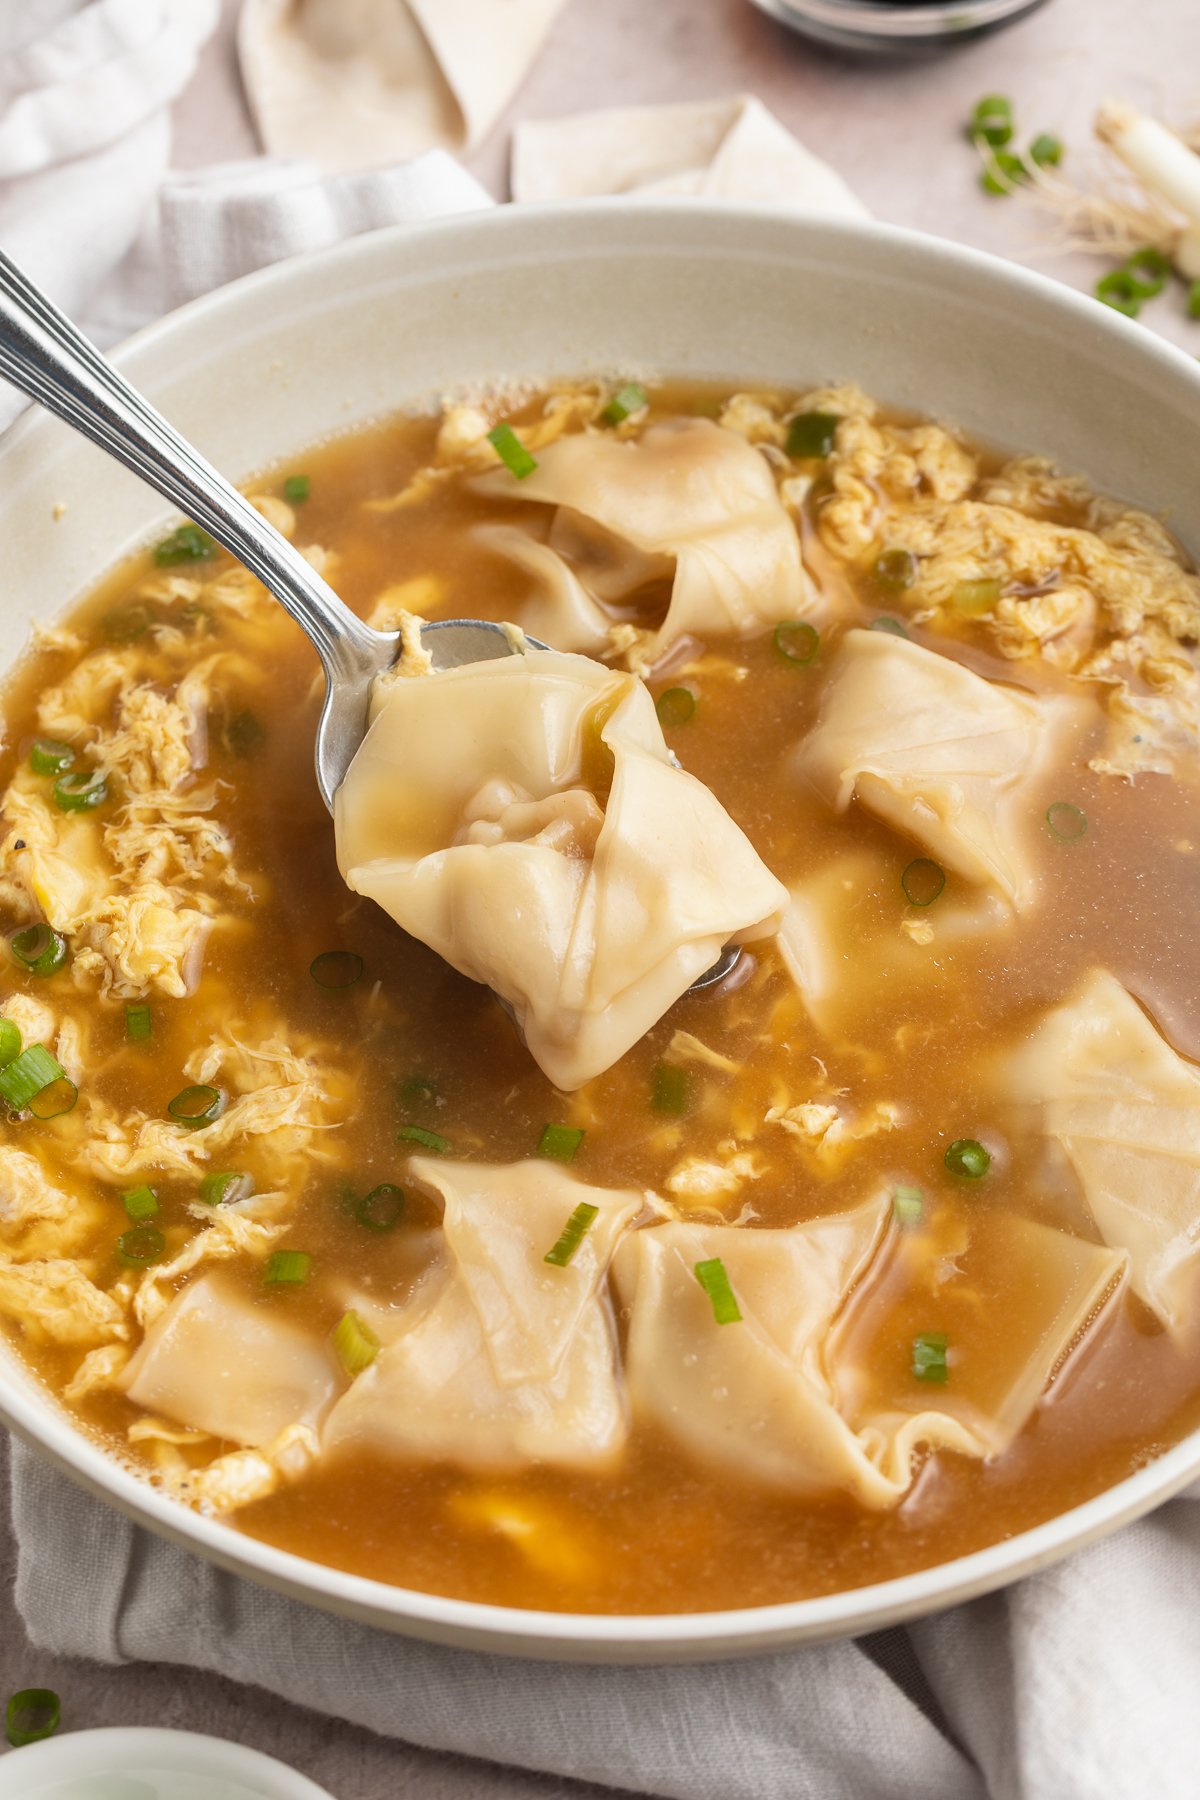 Angled photo of a bowl of wonton egg drop soup. A spoon lifts a wonton up and out of the broth.